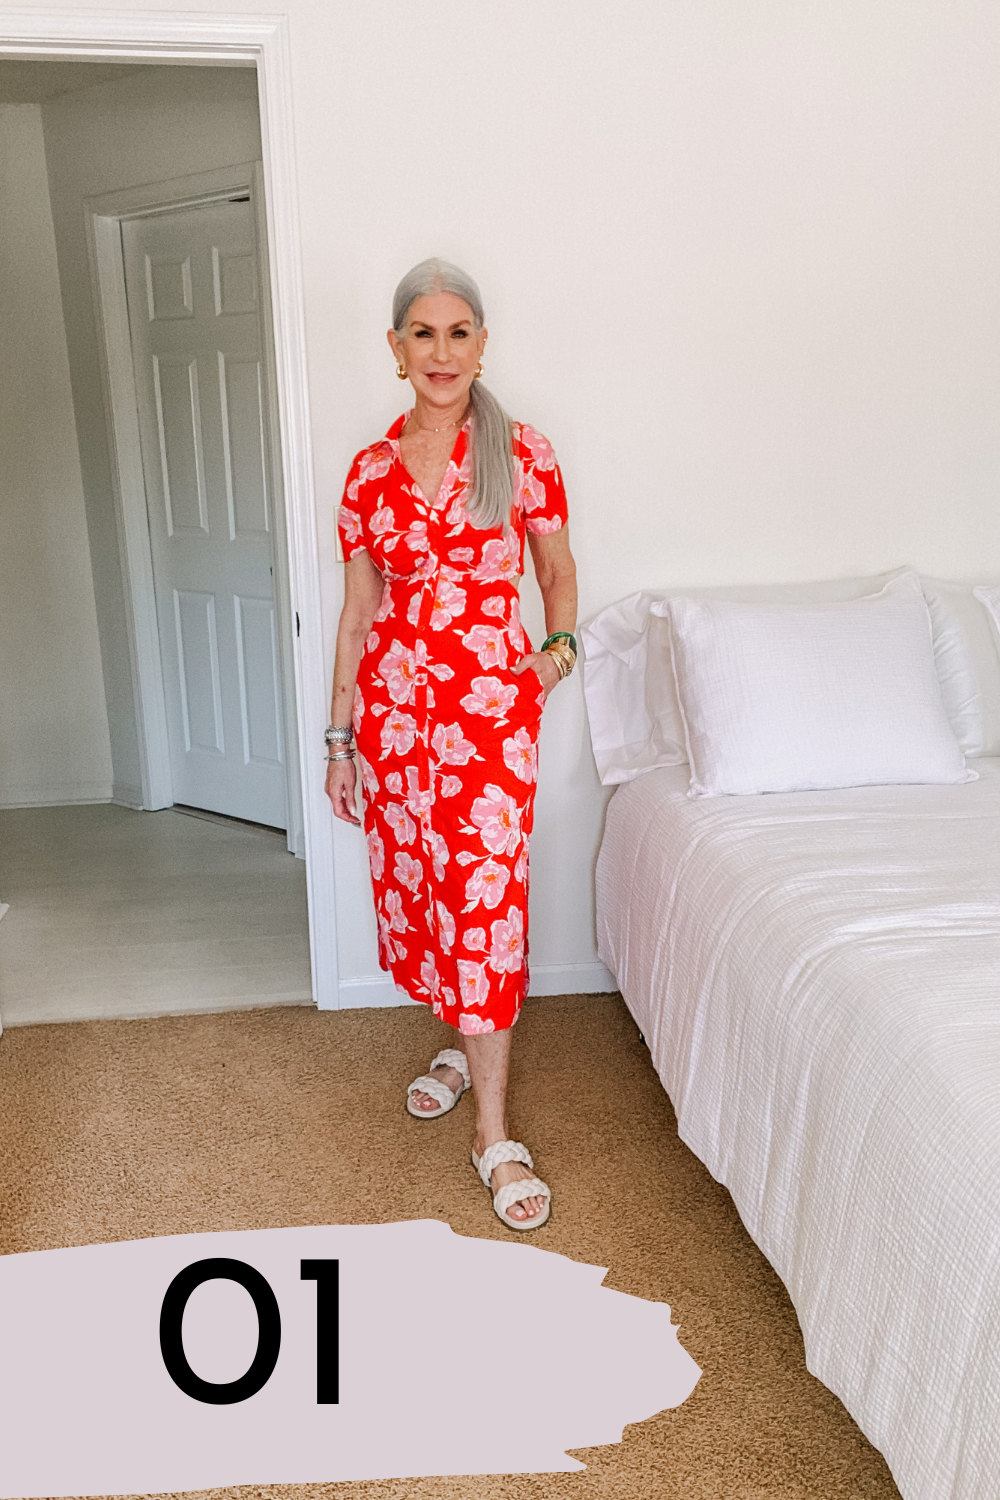 silver hair lady wearing red and white patterned dress